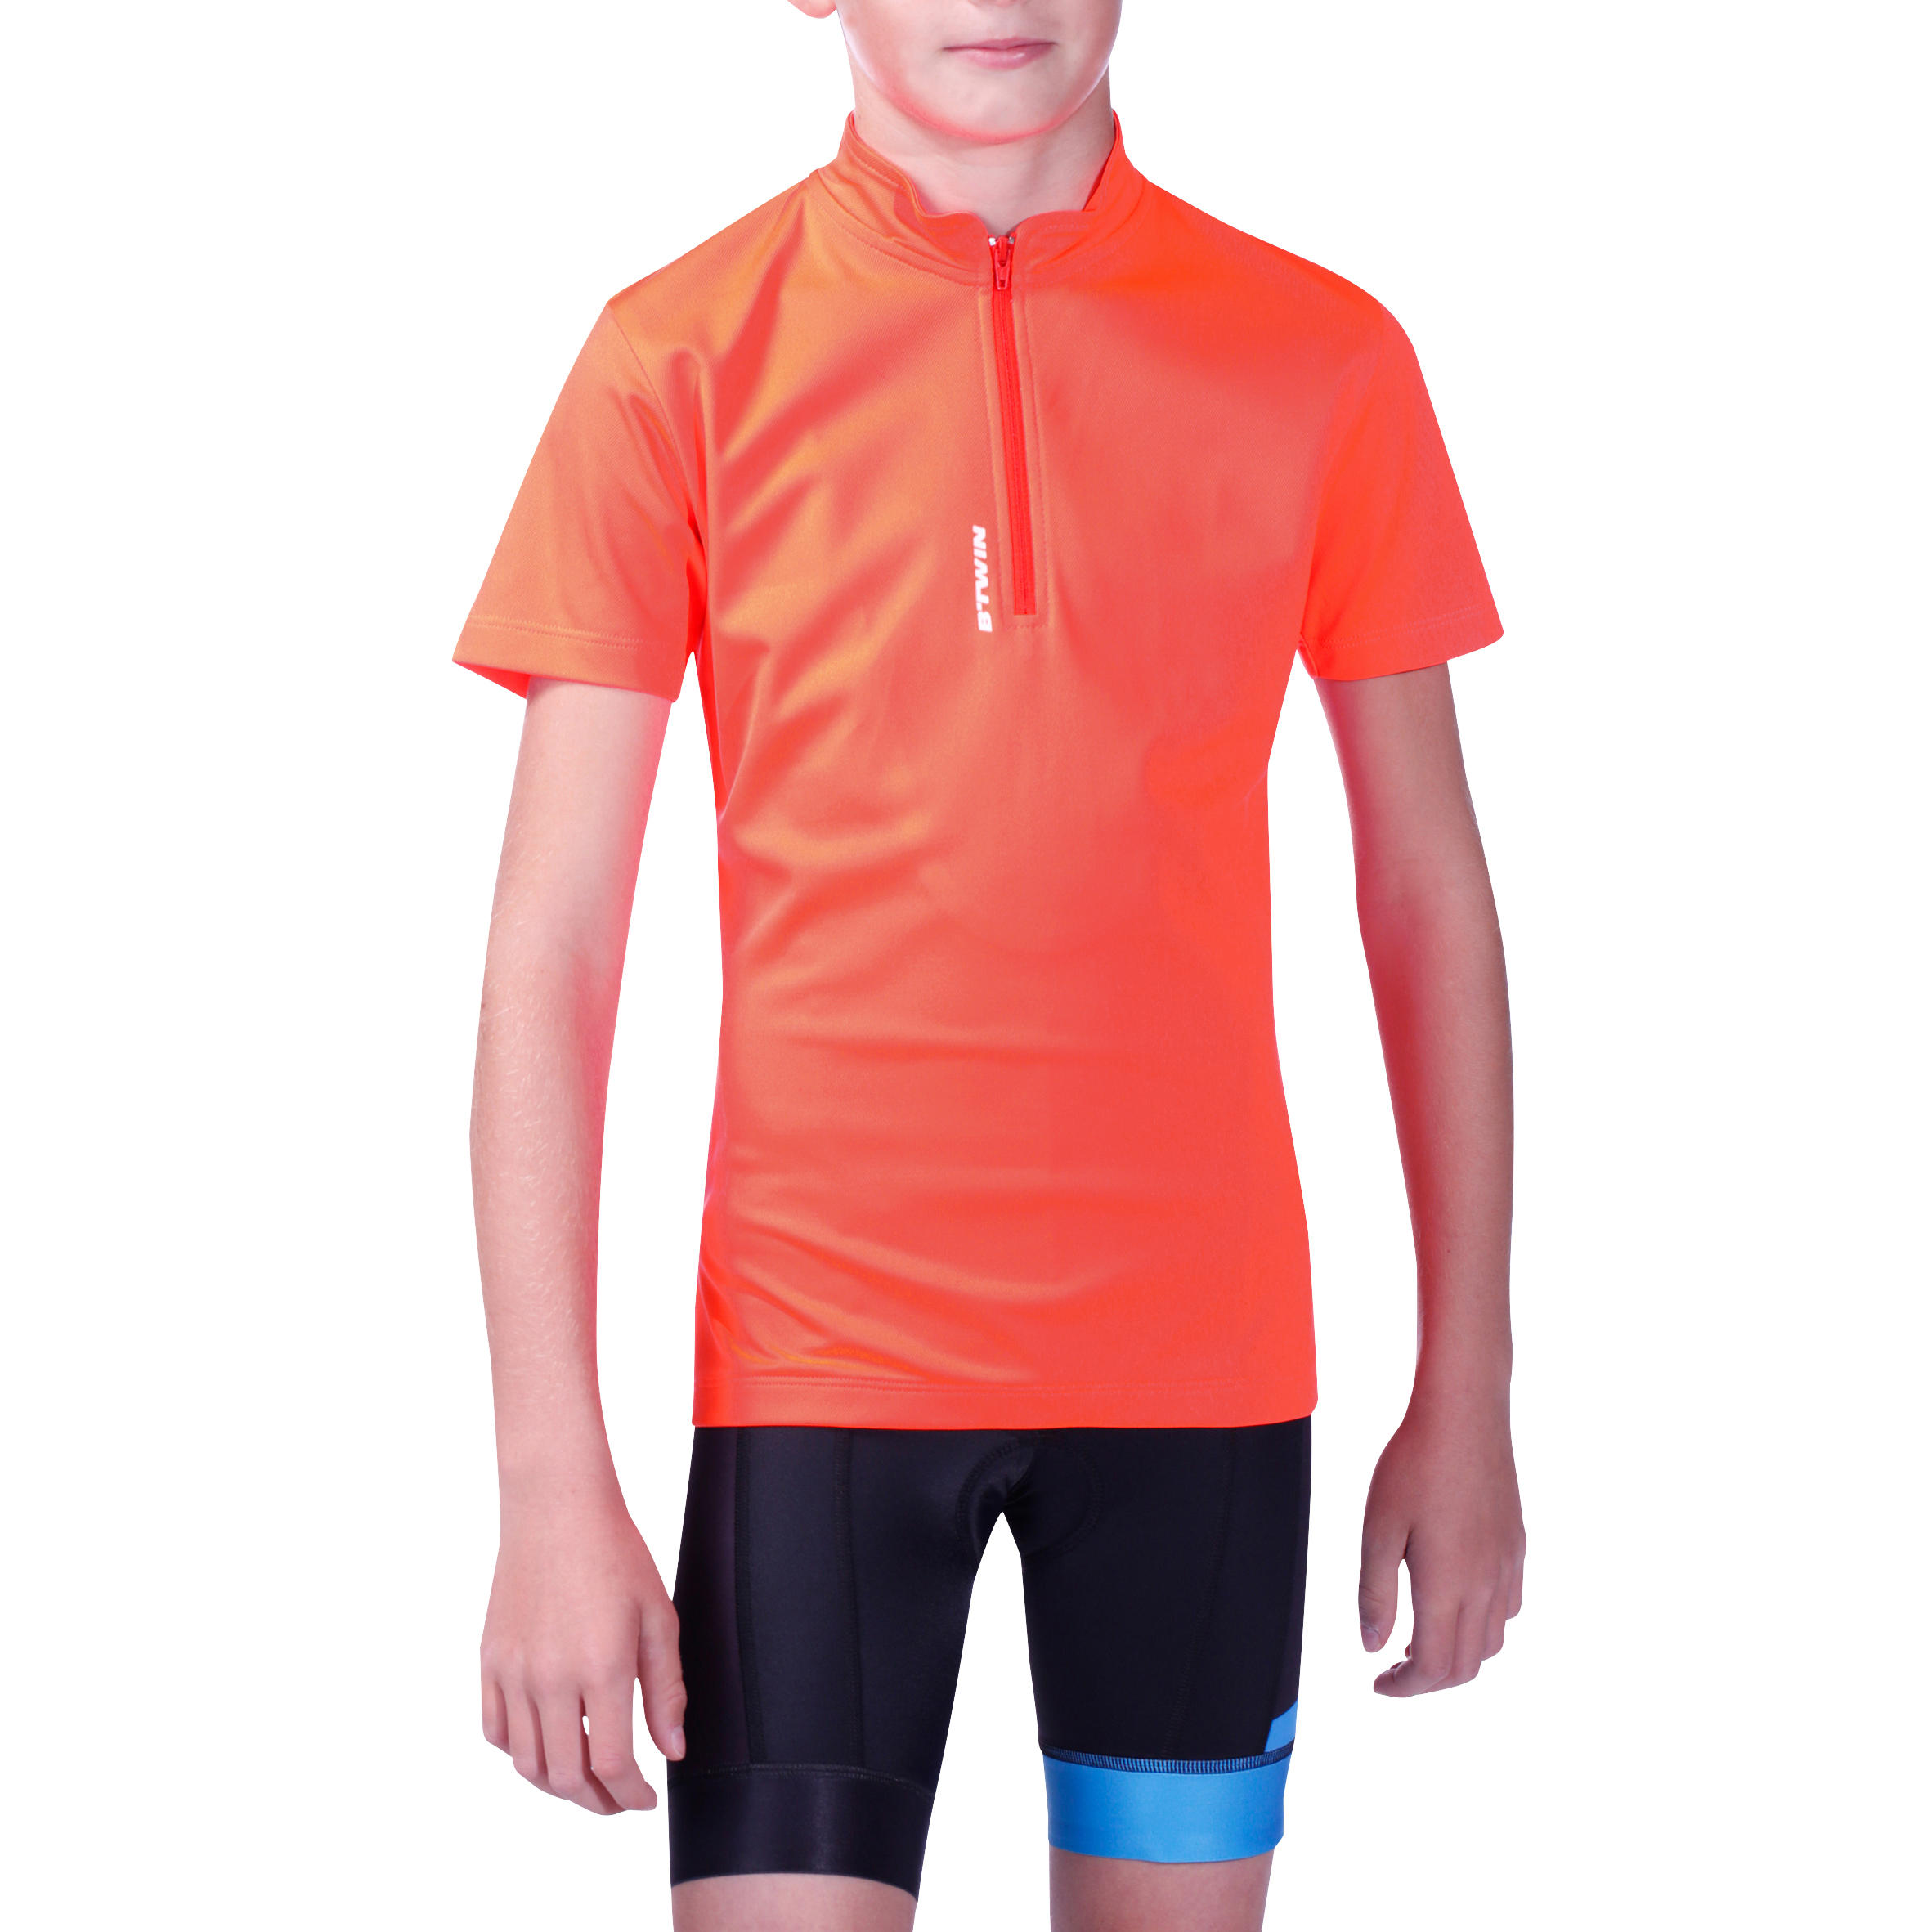 300 Kids' Short Sleeve Cycling Jersey - Red 4/10